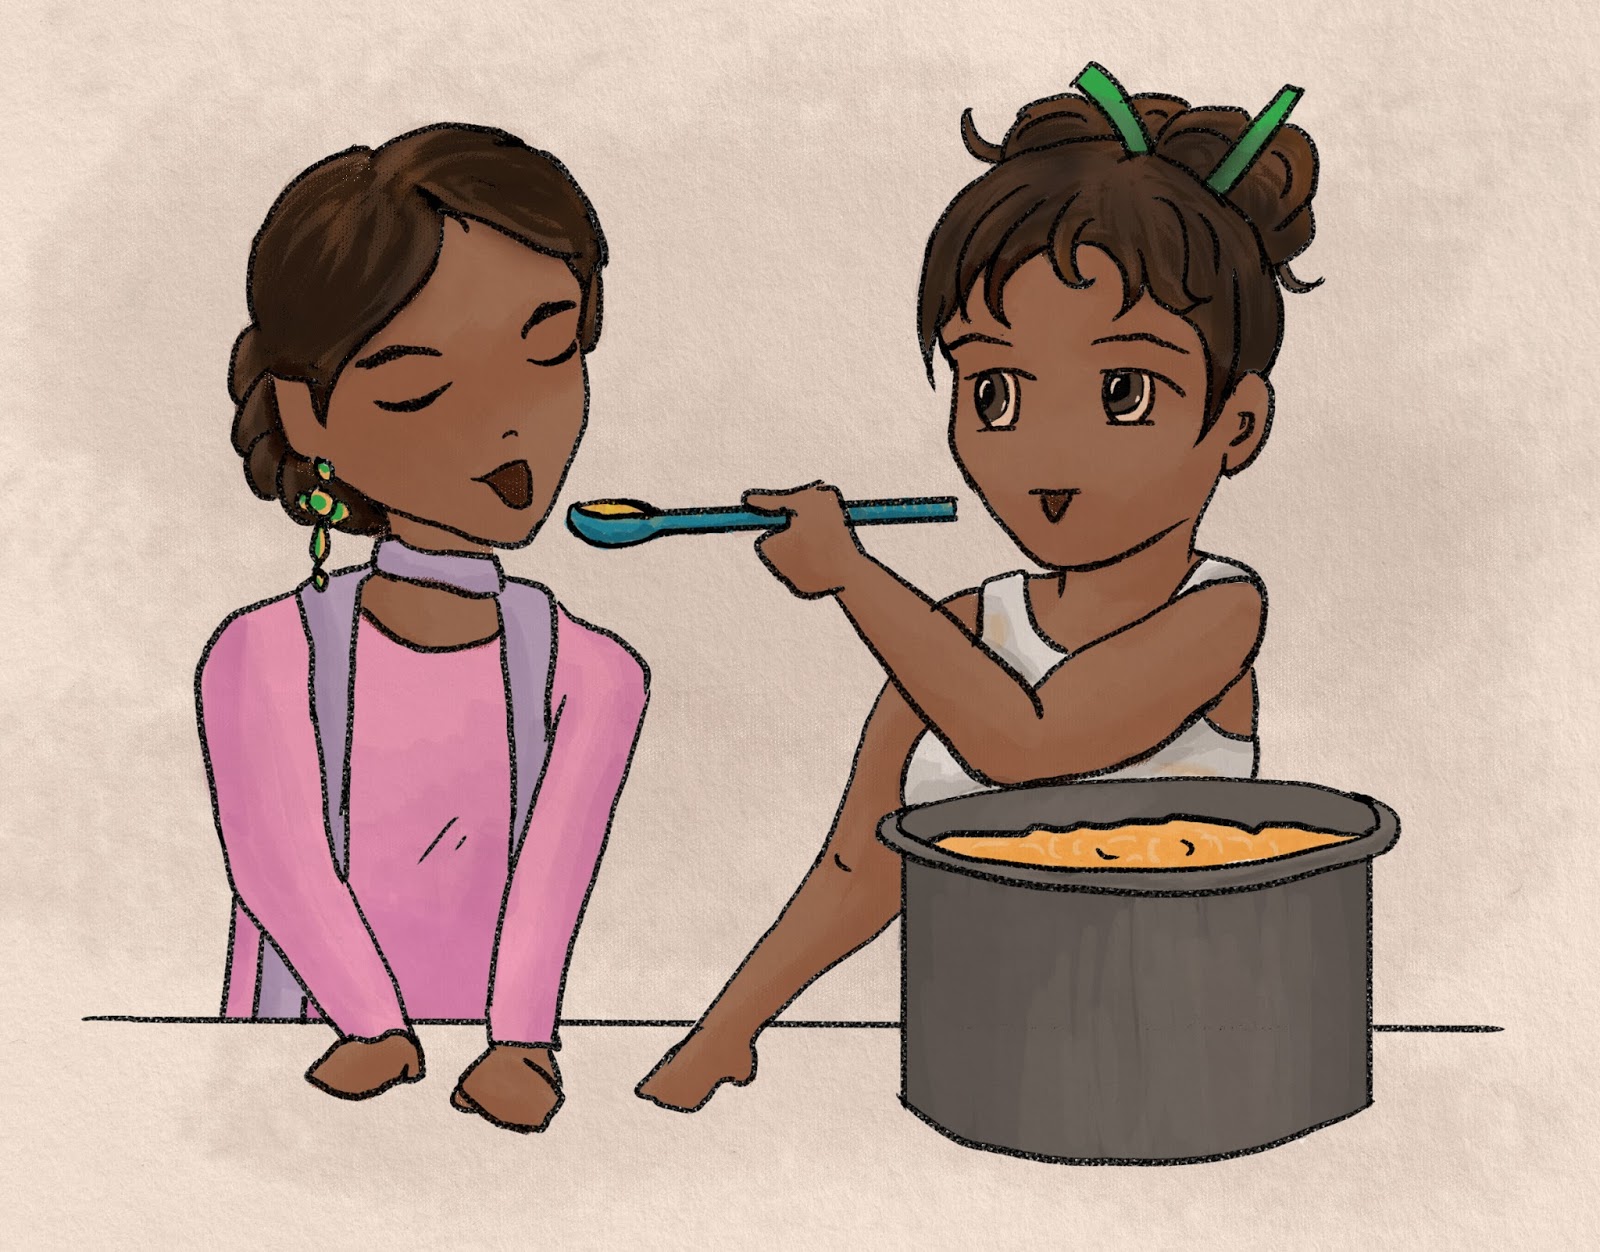 Image of Aviva giving Queen Shulamit a taste of food she made in a pot. Both are darker skin and are wearing light colors.